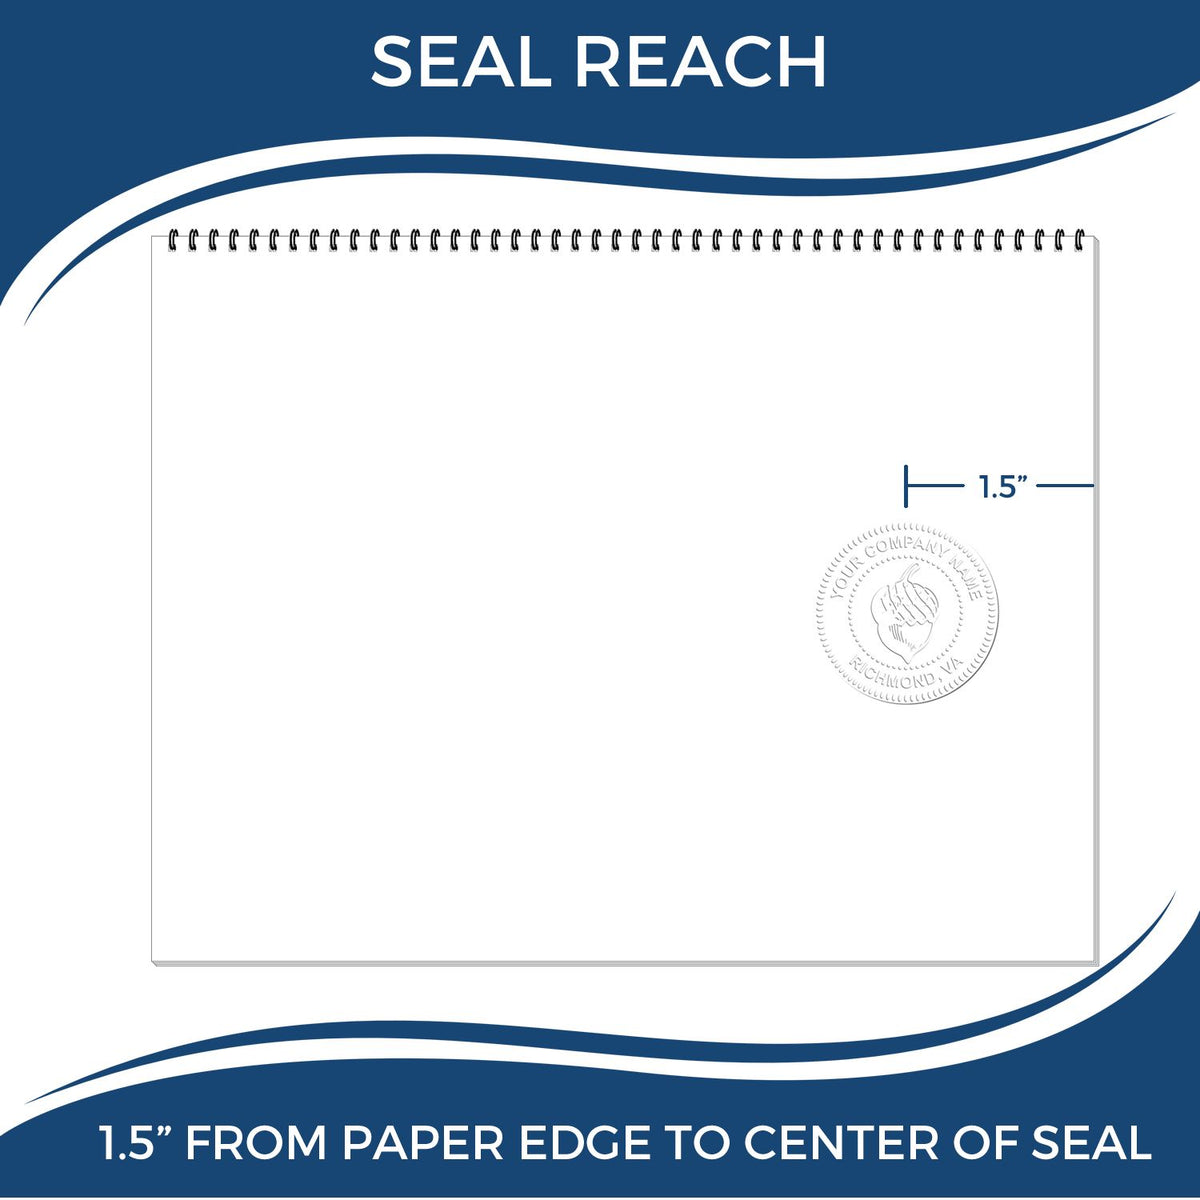 An infographic showing the seal reach which is represented by a ruler and a miniature seal image of the Hybrid Alaska Engineer Seal